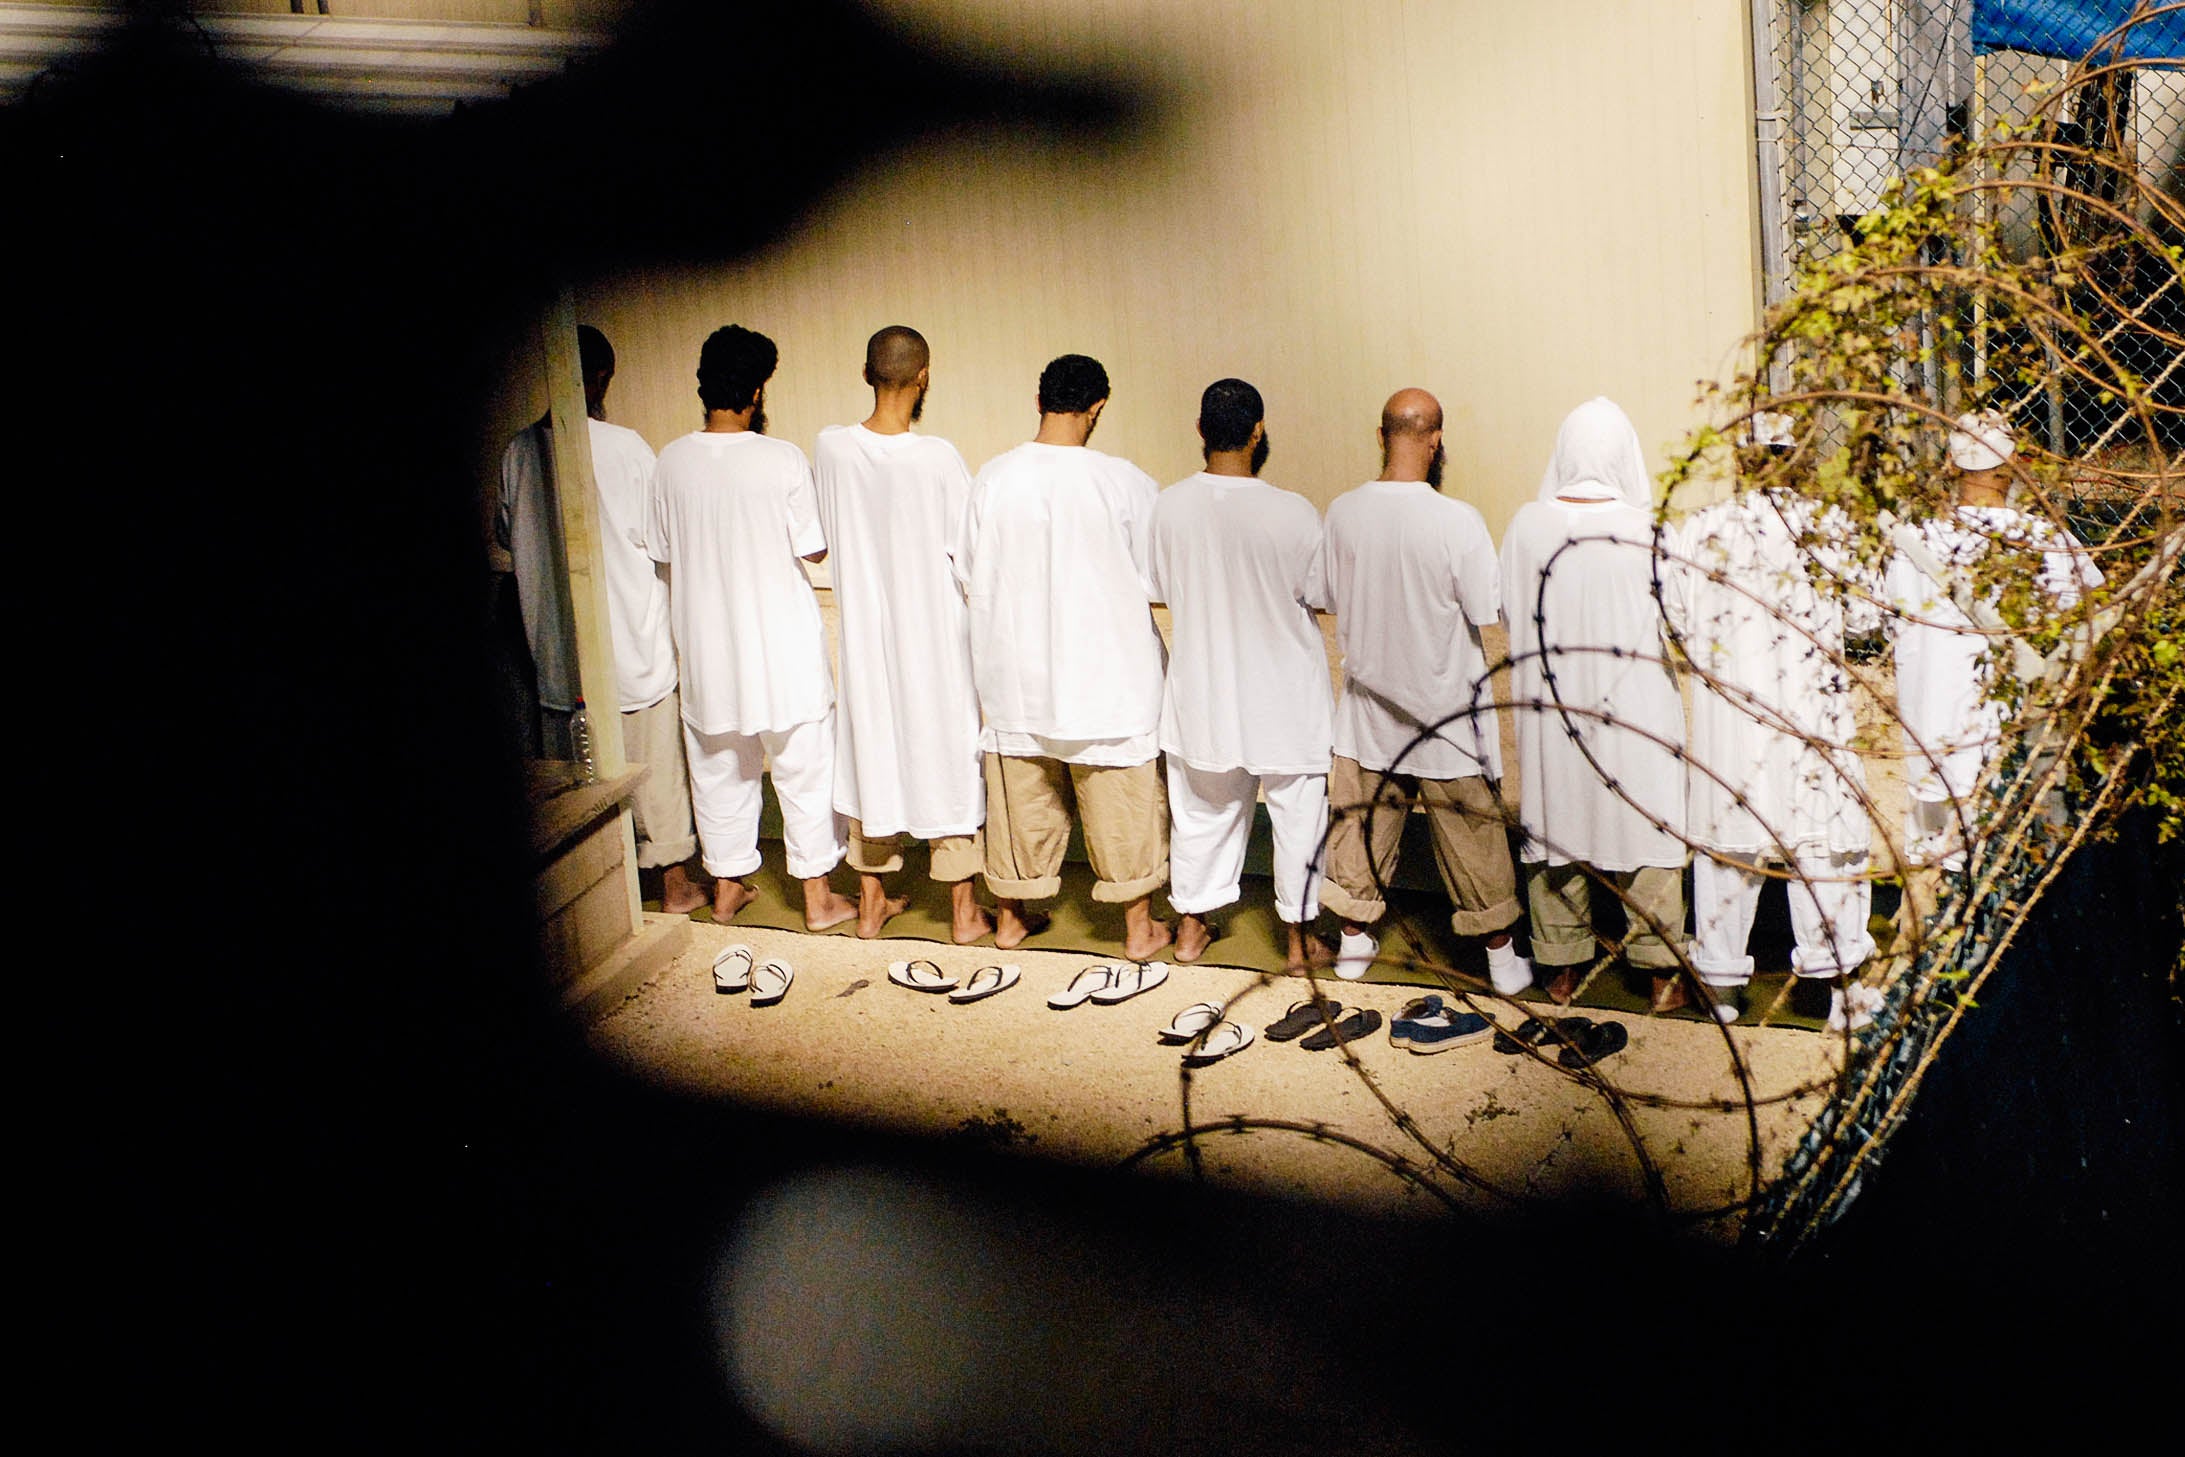 A group of detainees observe morning prayer before sunrise at Guantanamo Bay in an Oct. 28, 2009 file photo provided by the Department of Defense.